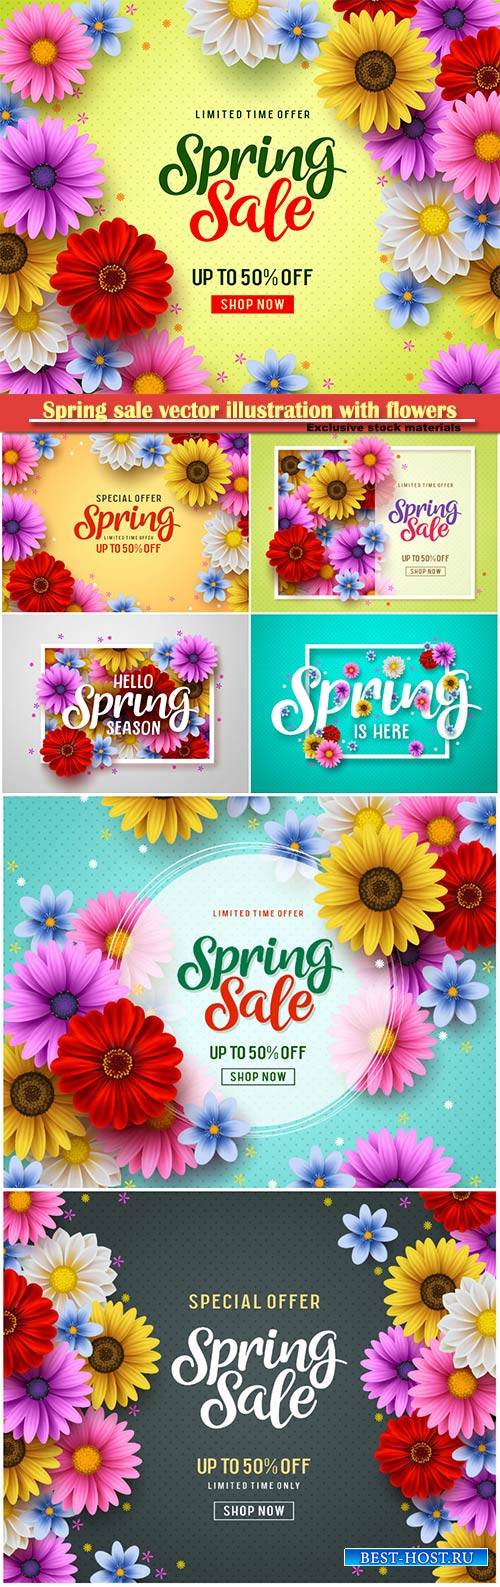 Spring sale vector illustration with flowers